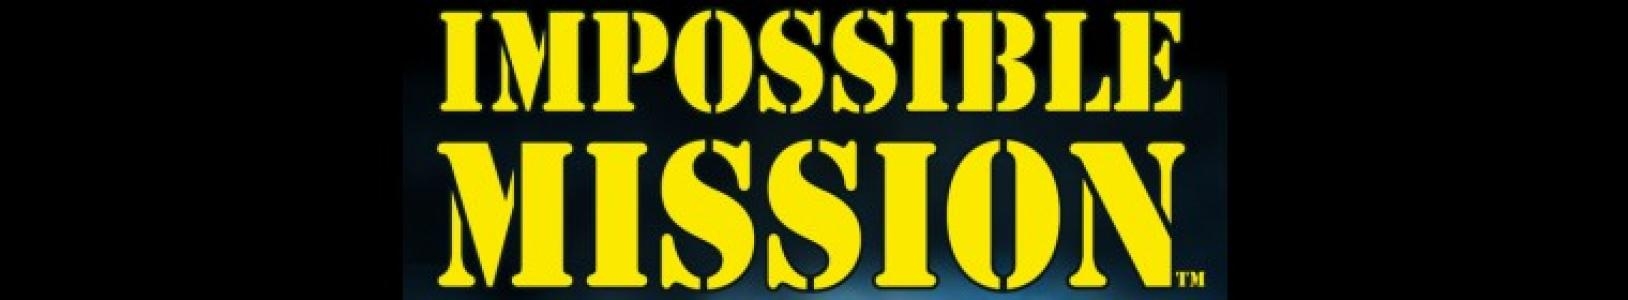 Impossible Mission banner